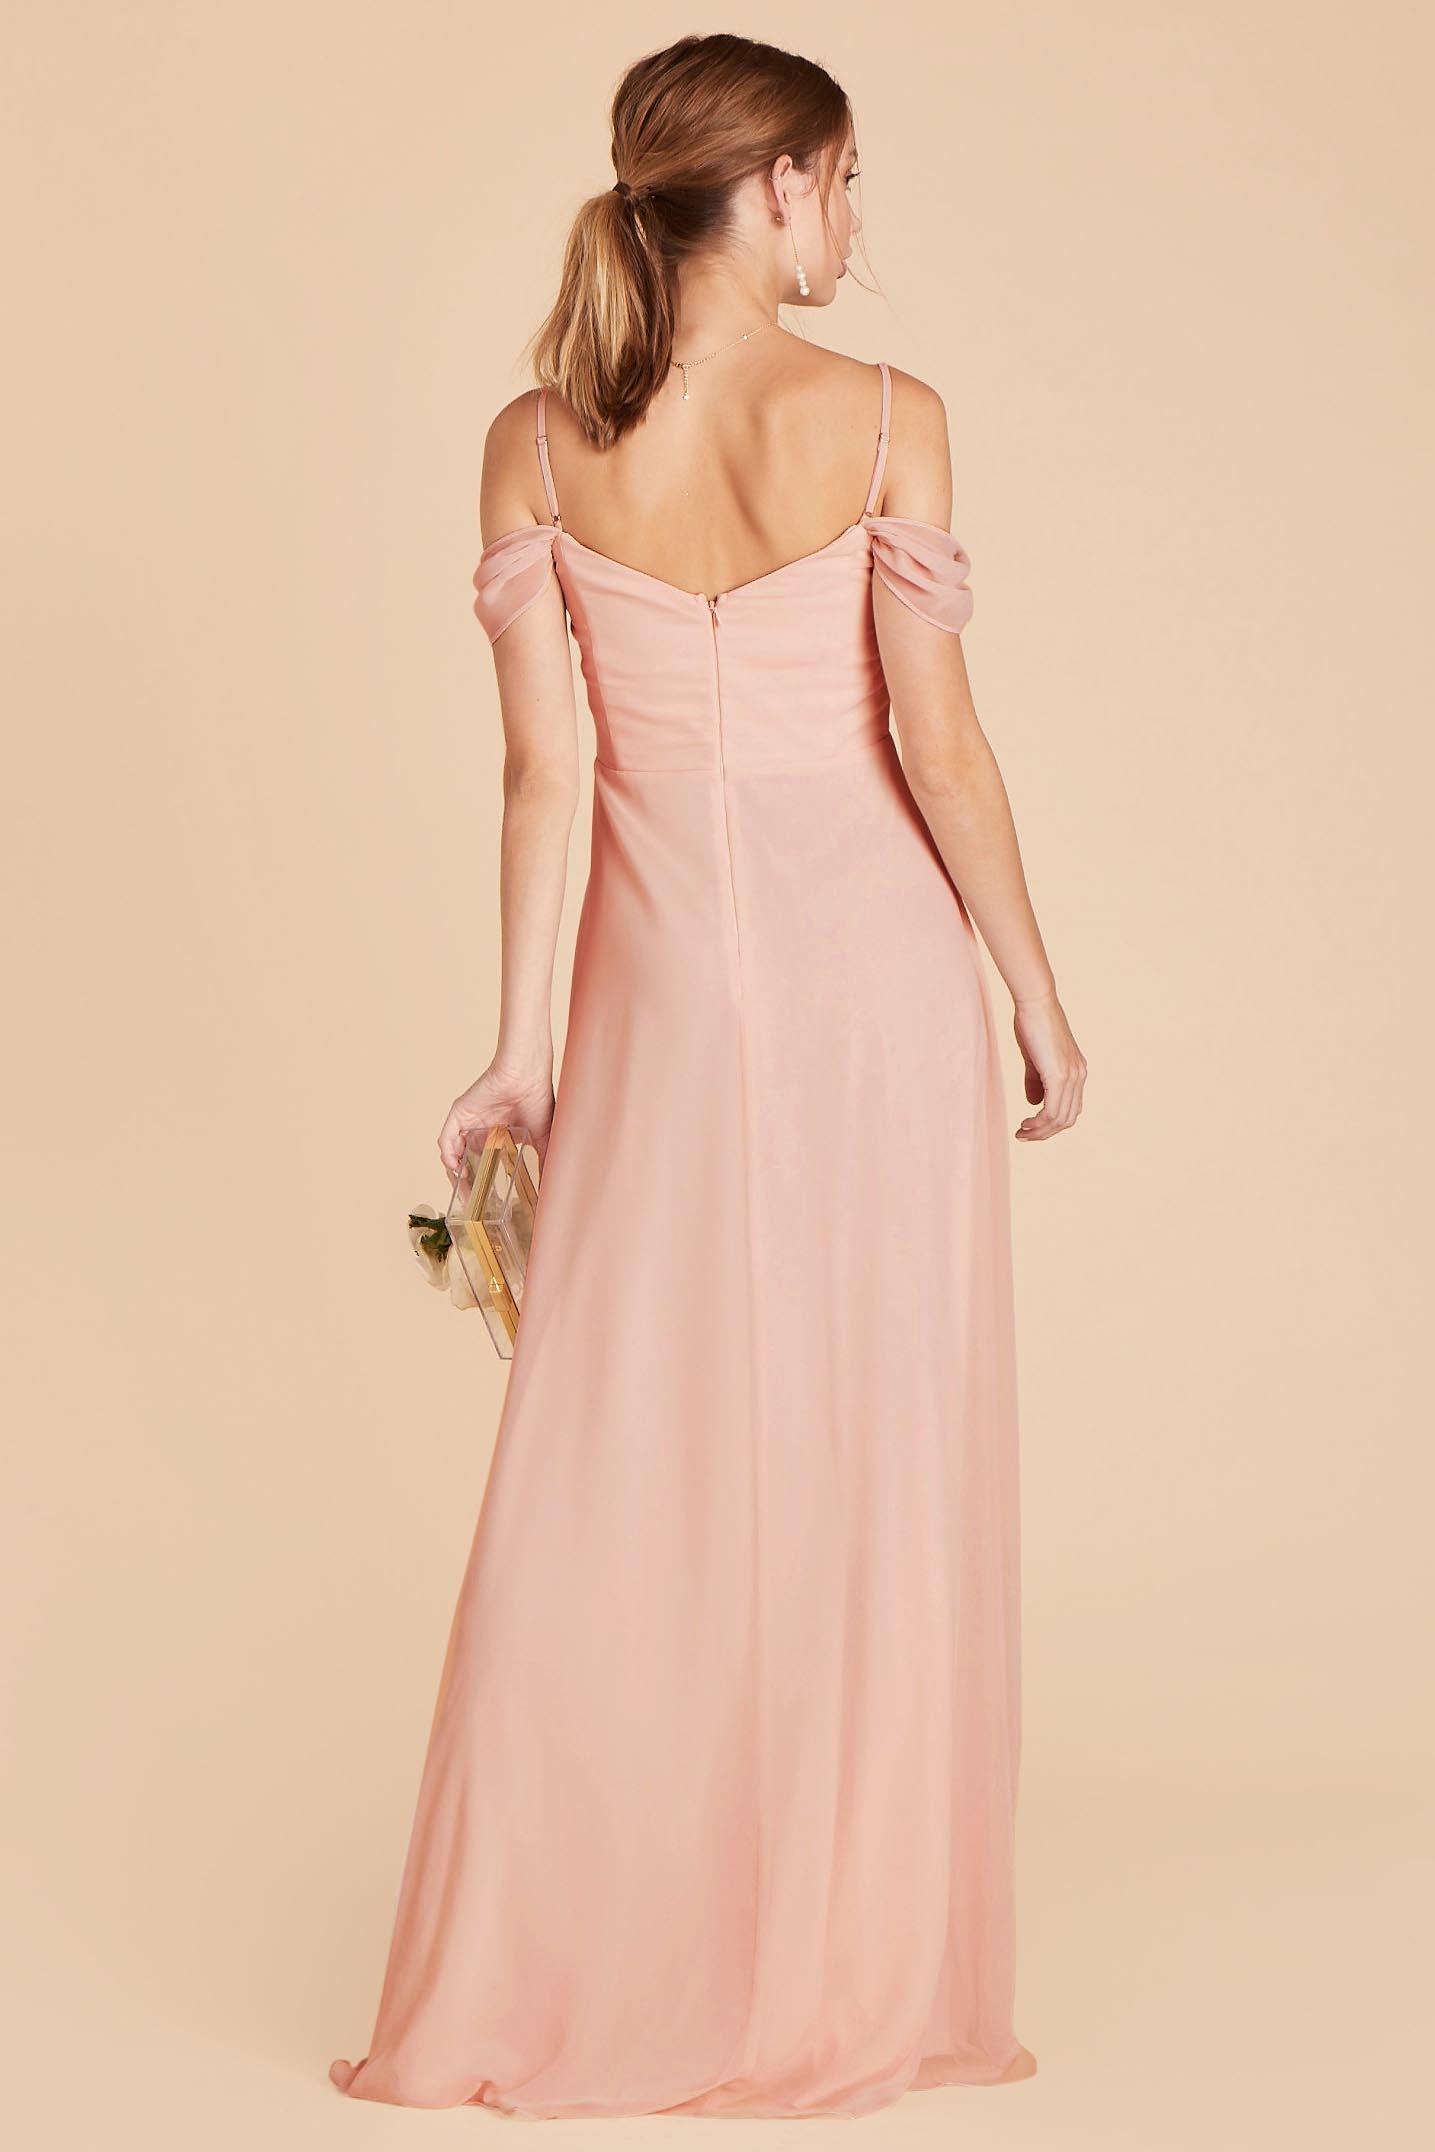 Blush Pink Spence Convertible Dress by Birdy Grey